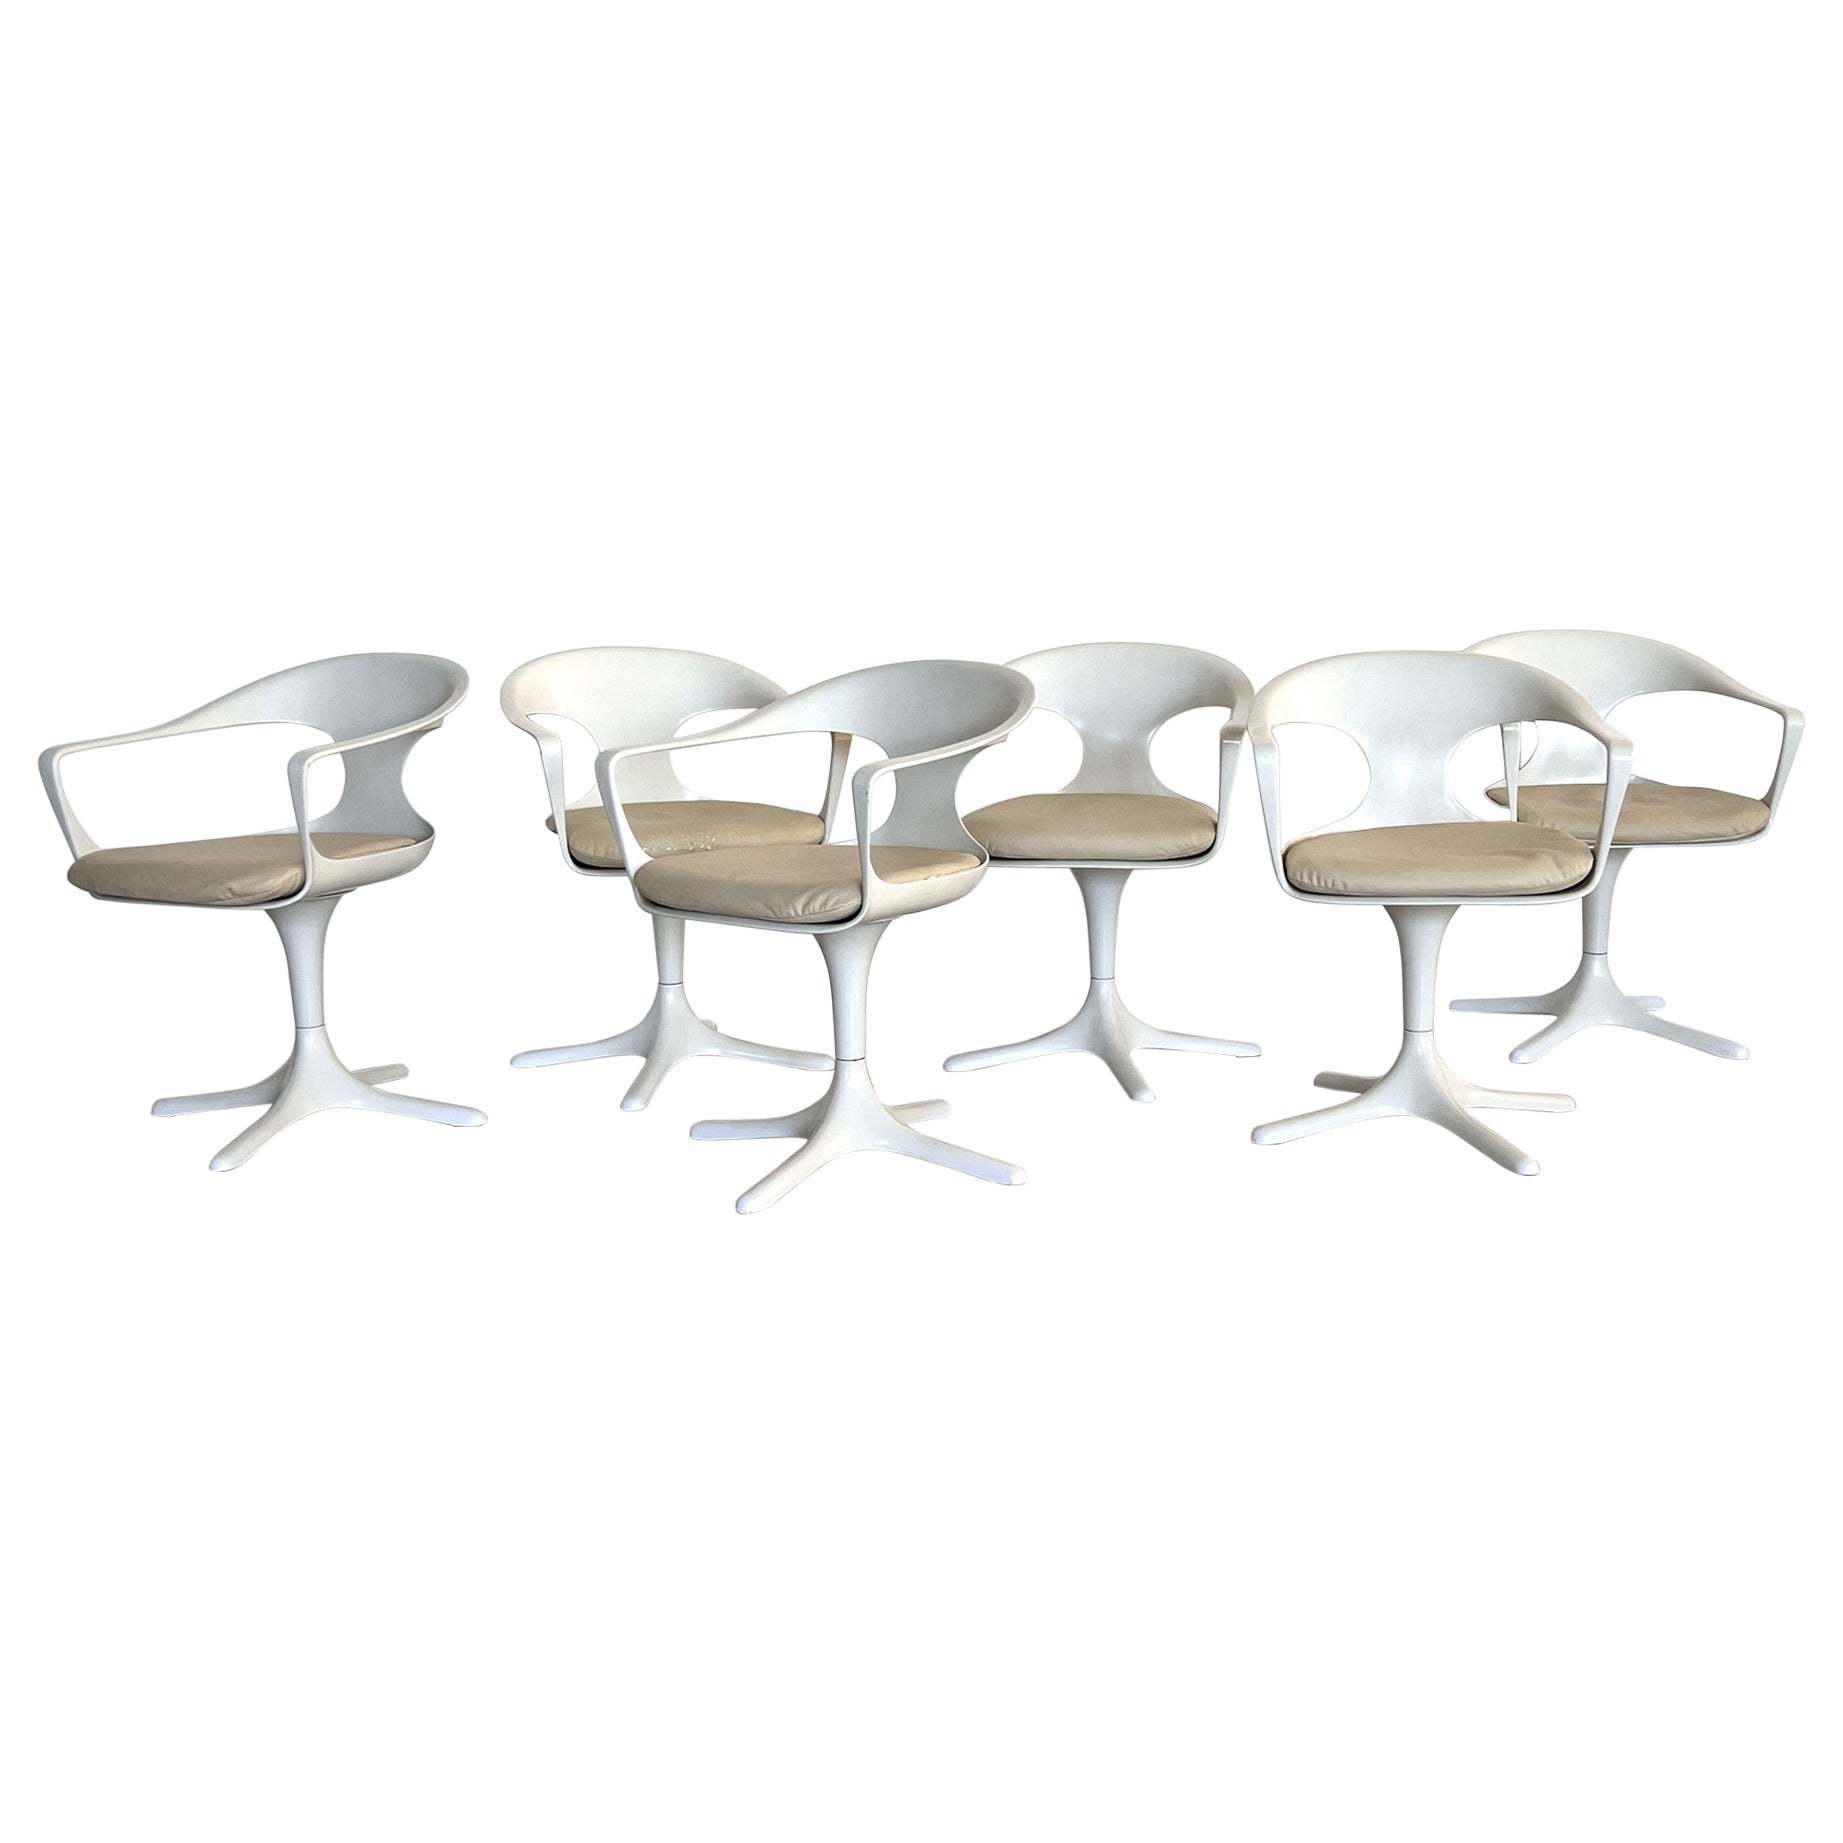 Space Age Swivel Dining Room Chairs by Konrad Schäfer, Set of 6, 1960s